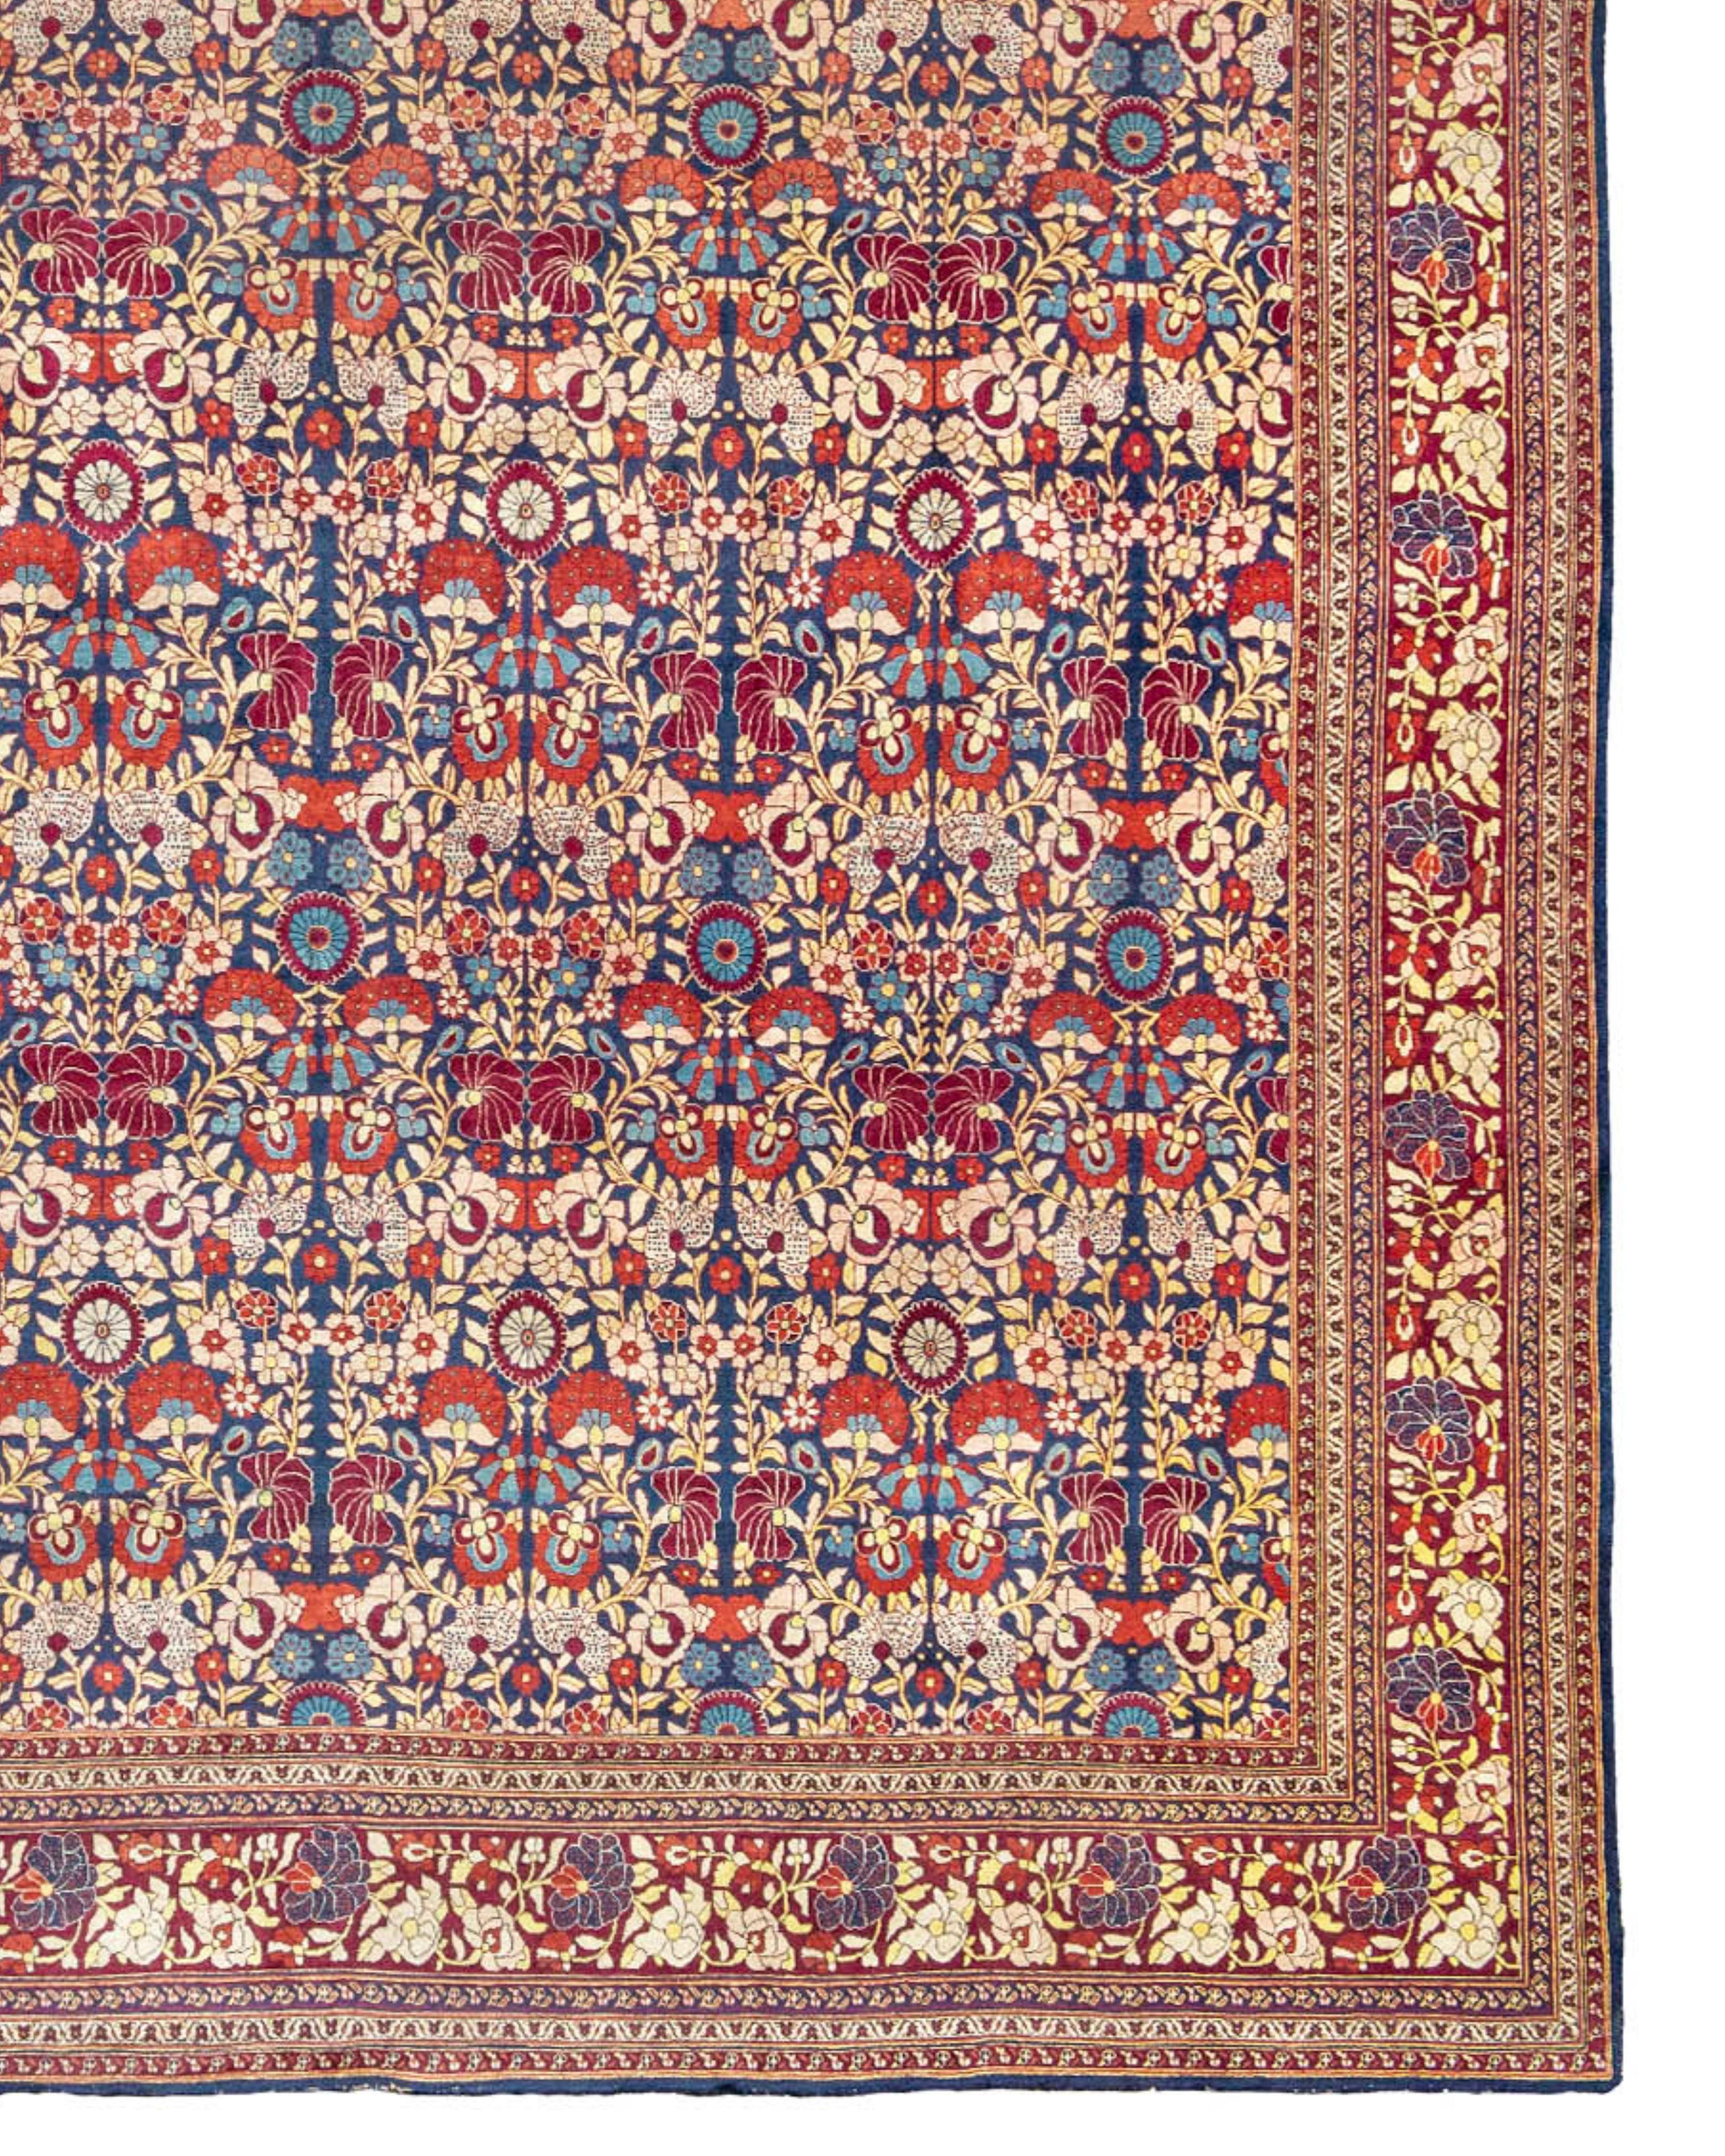 Antique Large Oversized Persian Mashad Carpet, c. 1900

Additional Information:
Dimensions: 12'10